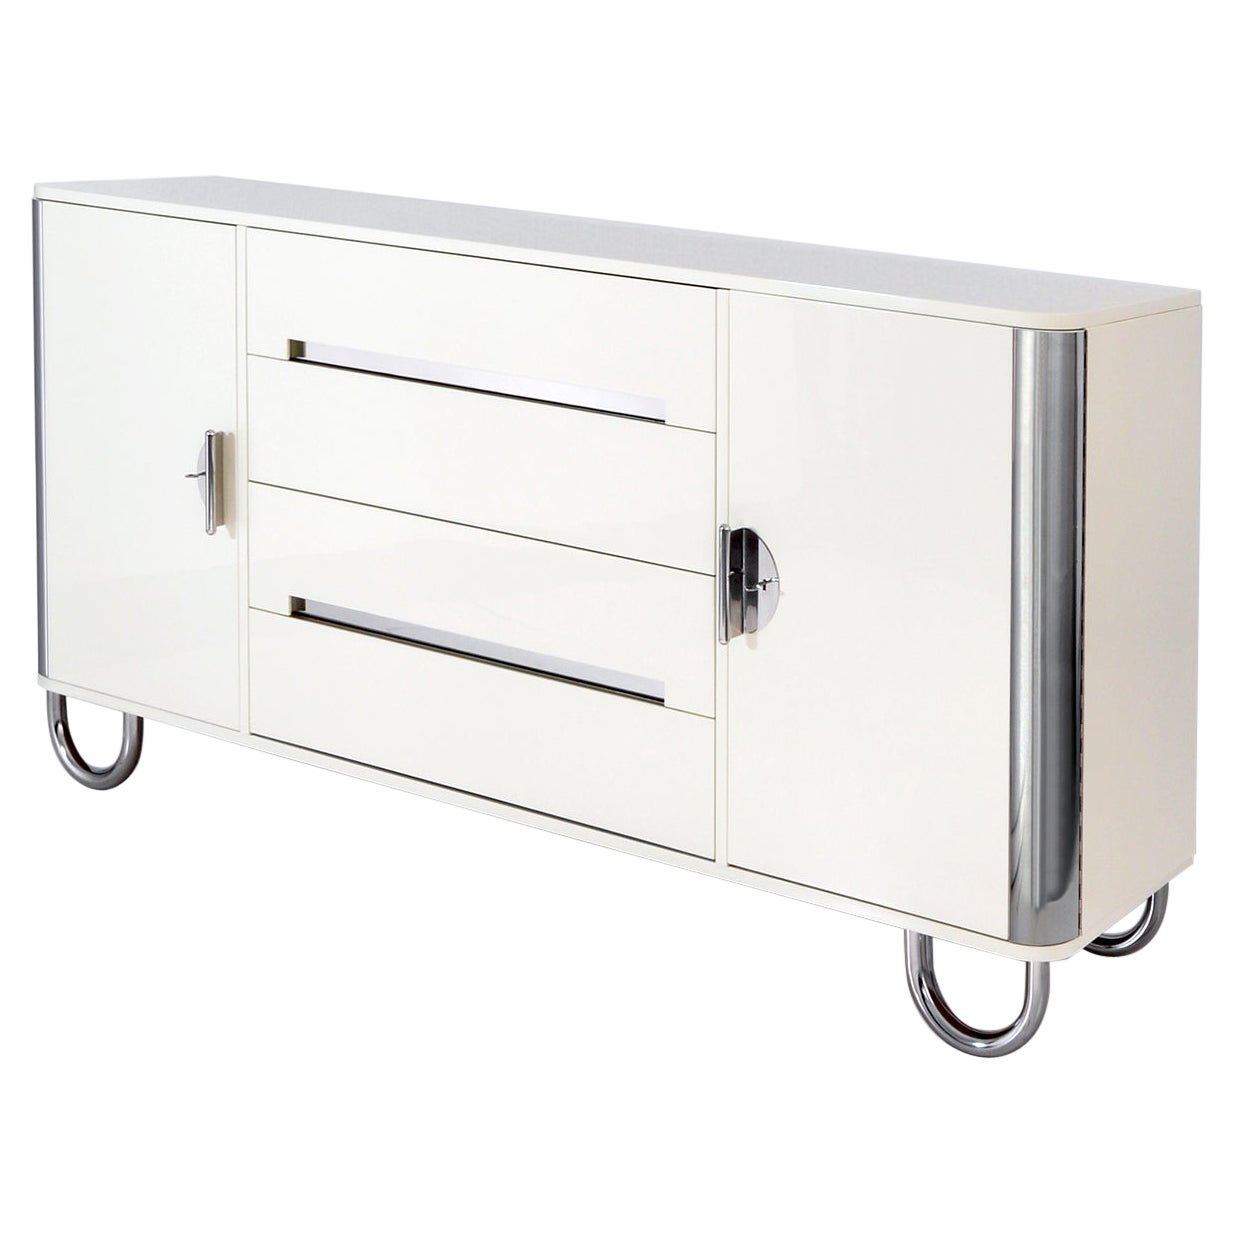 Bespoke Modernist Sideboard with Doors and Drawers, High-Gloss Lacquered Wood For Sale